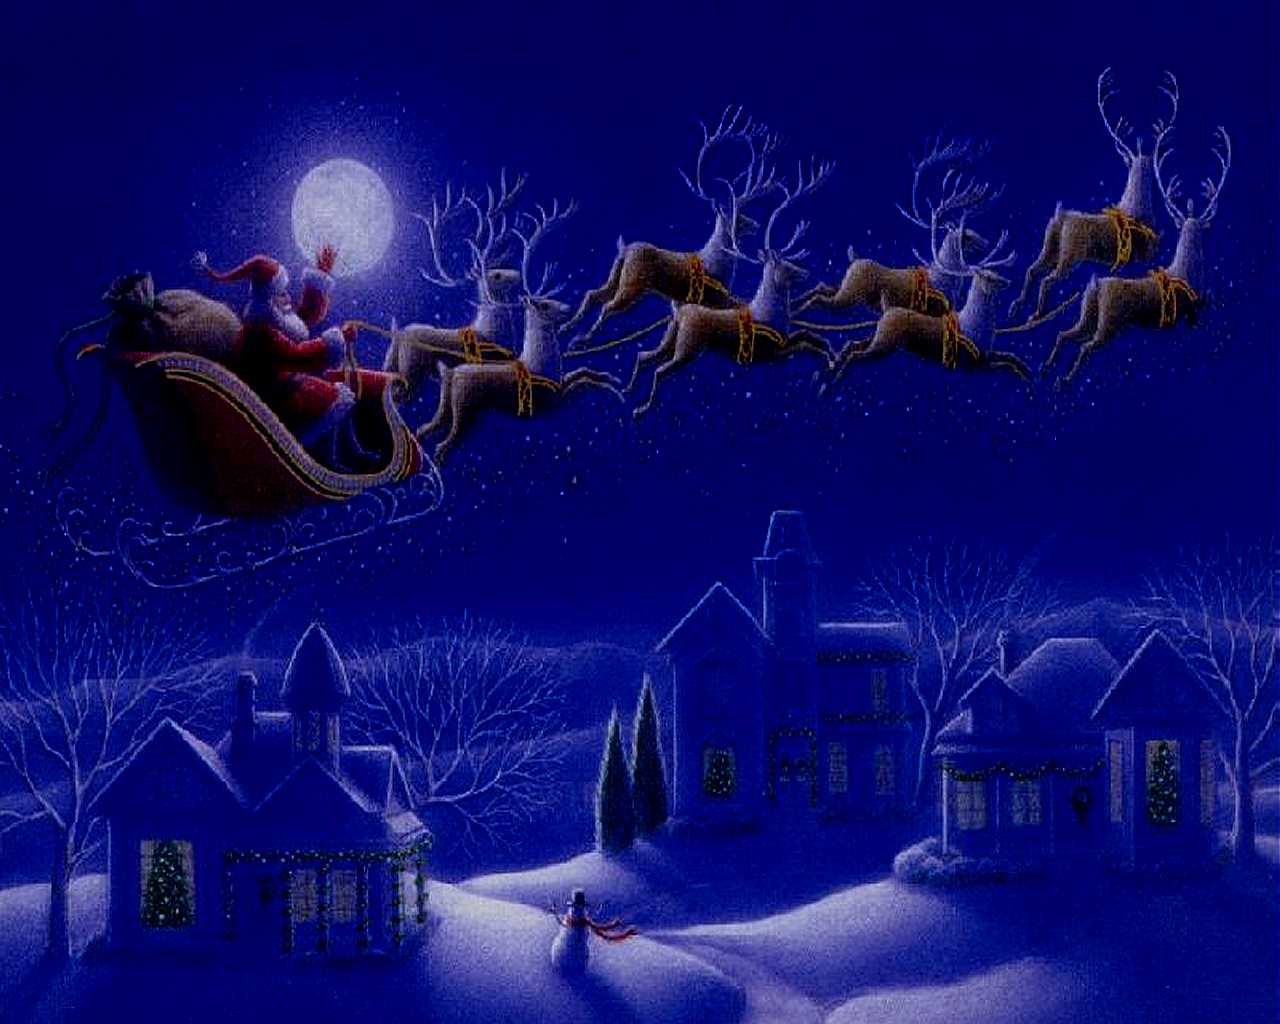 A Collection Of Christmas Images